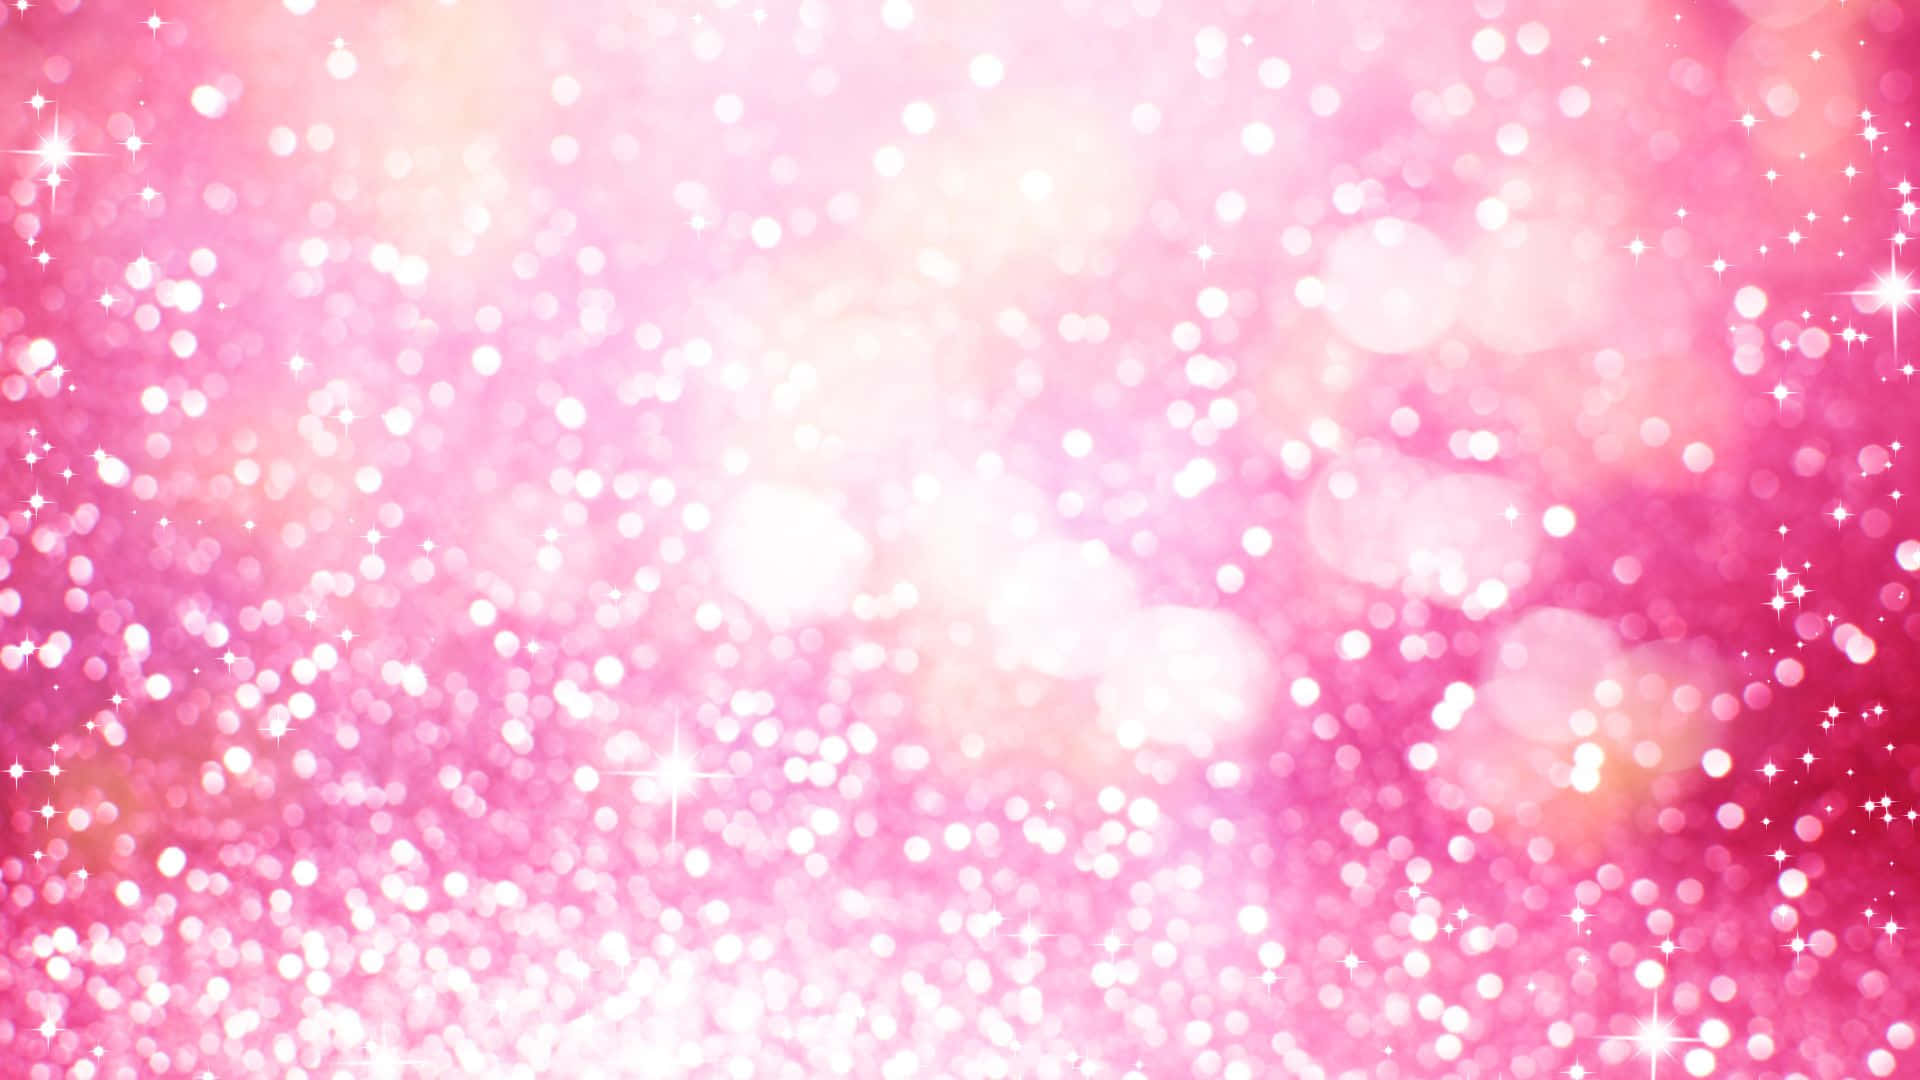 Captivating Pink Sparkles Wallpaper to Enliven Your Screen Wallpaper